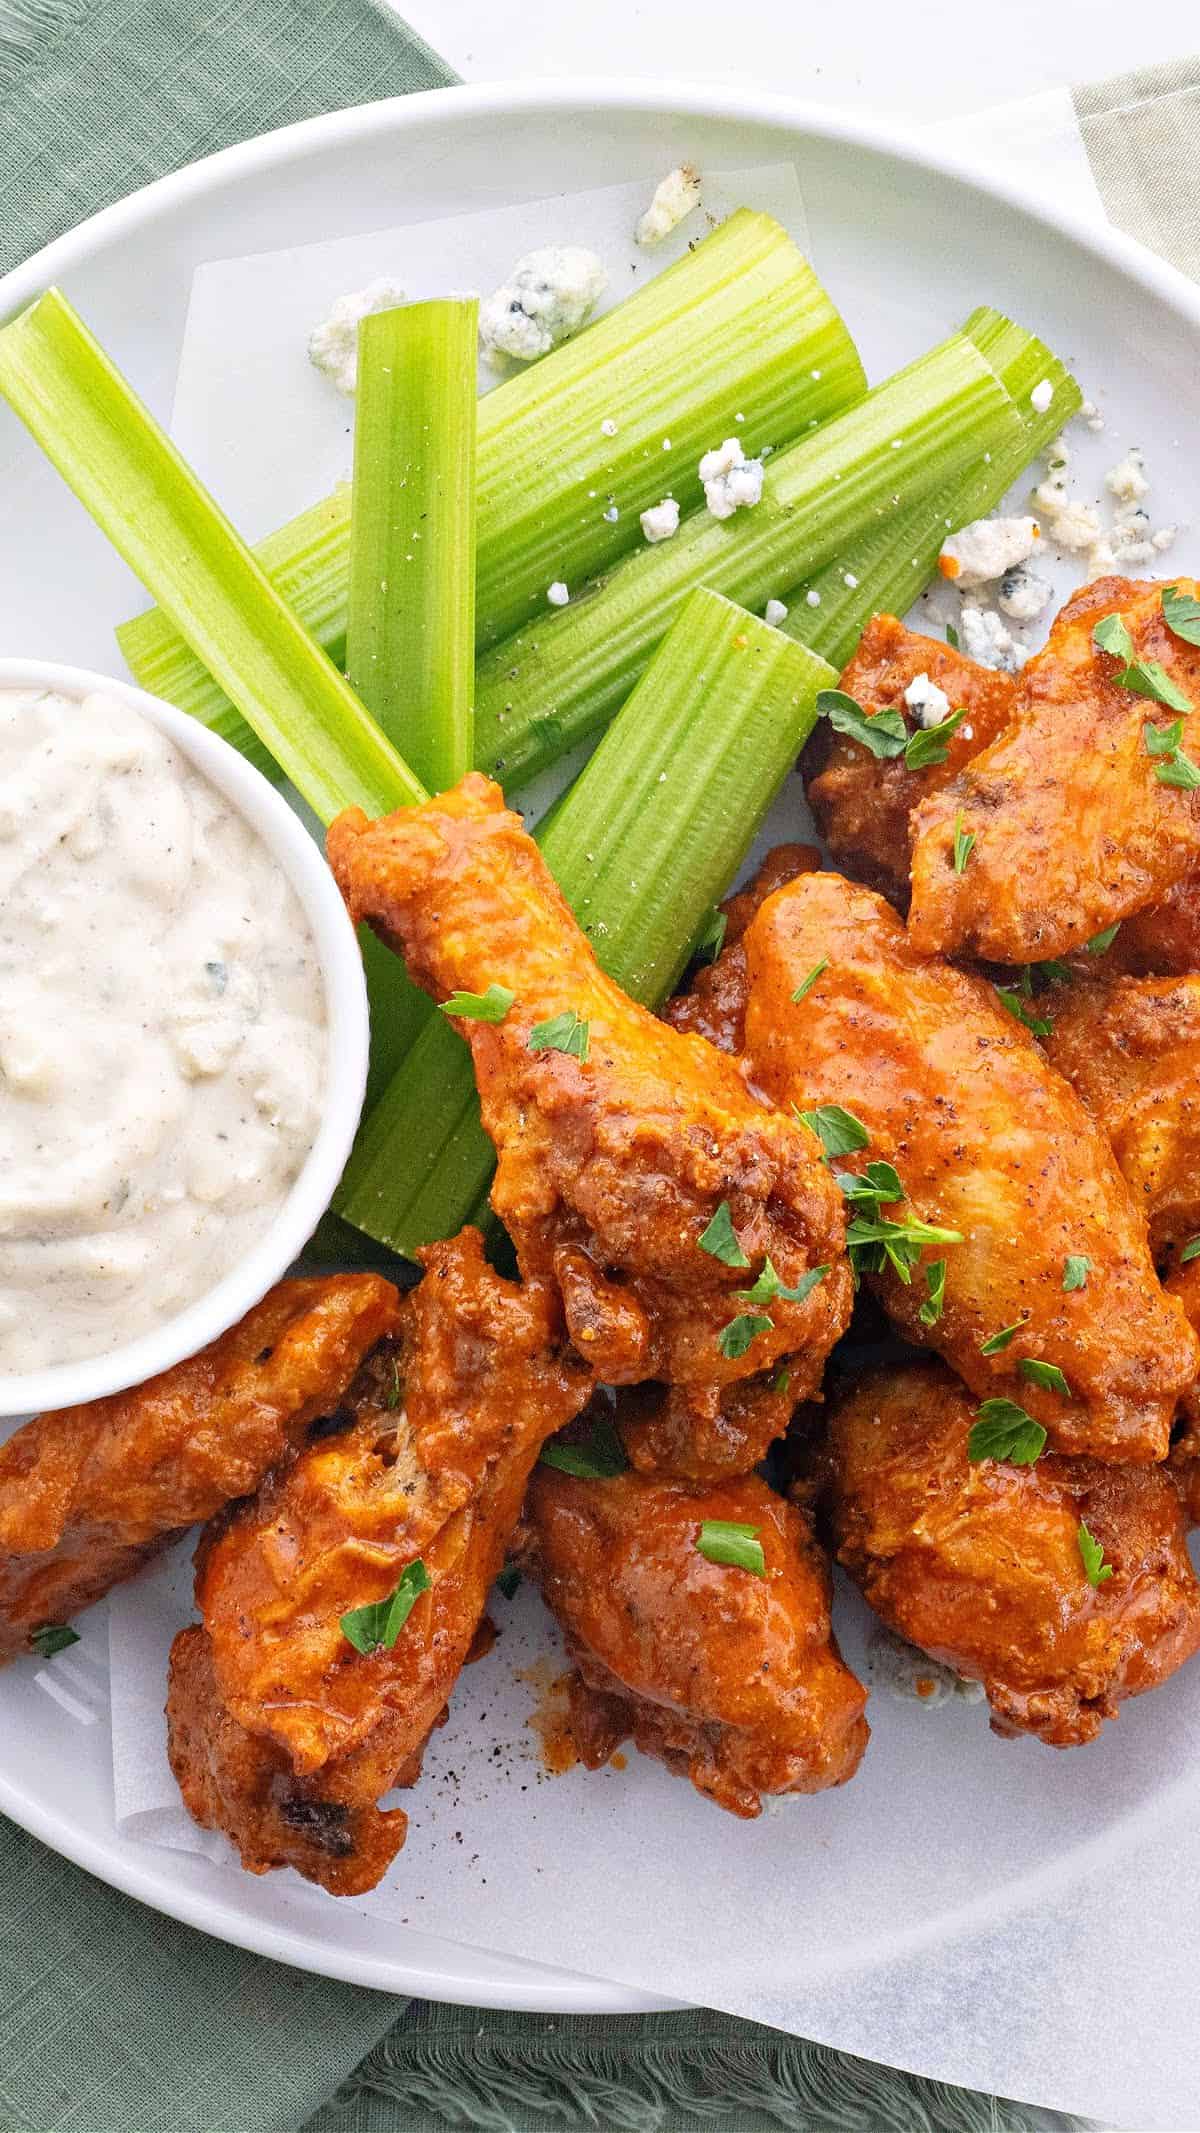 a plate of buffalo wings with blue cheese dressing and celery sticks